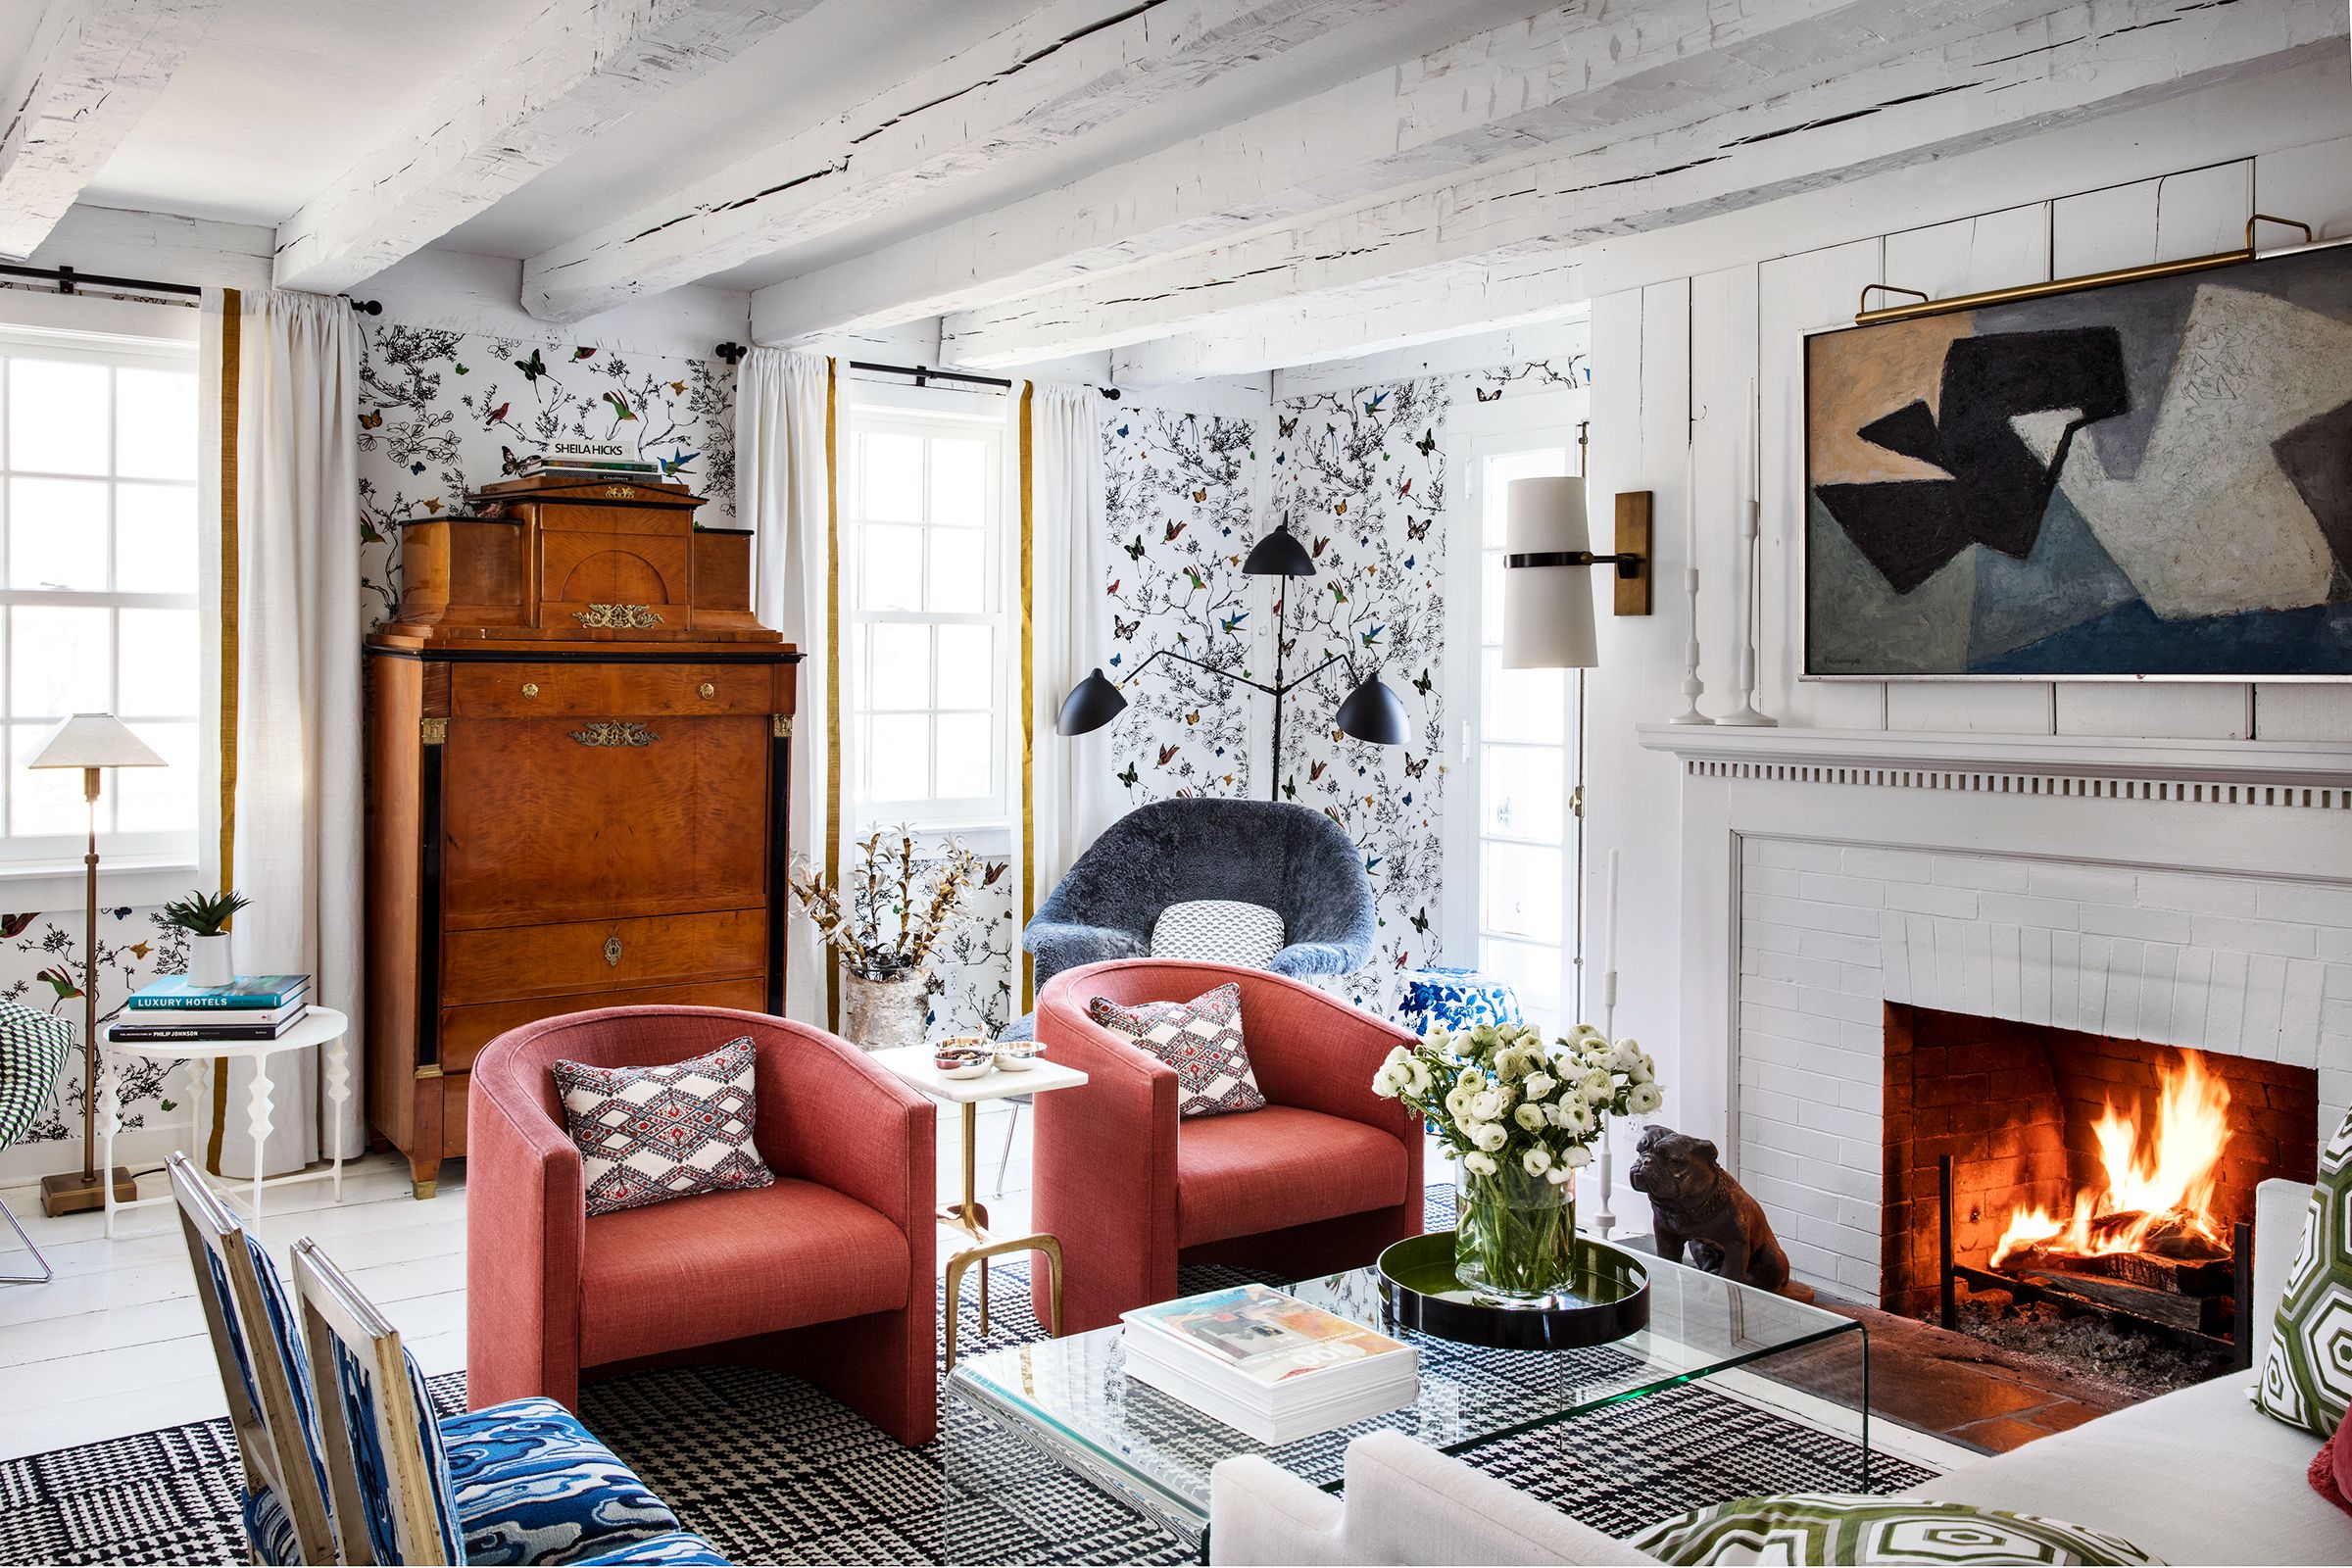 Living Room Wallpaper Trends to Take Inspiration From